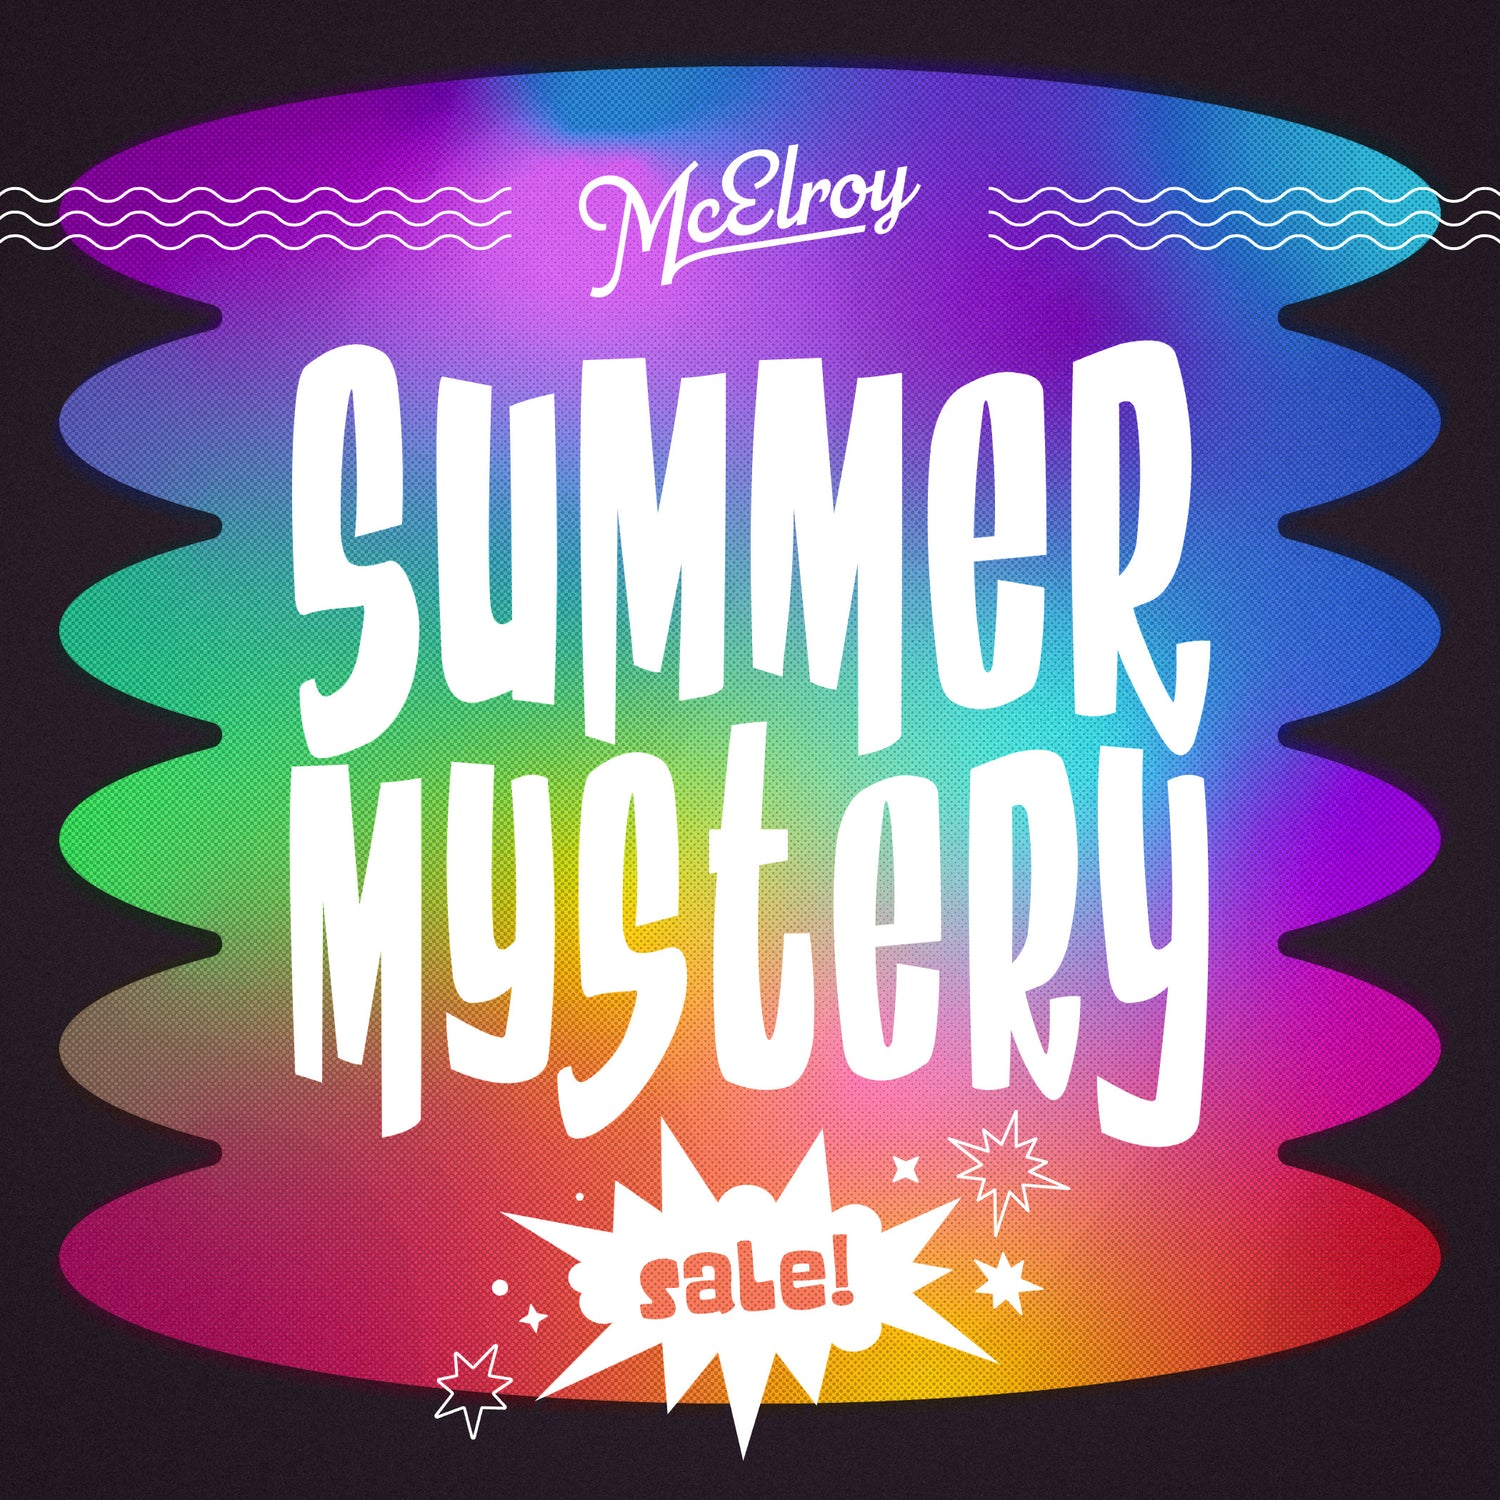 A gradient rainbow graphic that says, “McElroy Summer Mystery Sale!” “Summer Mystery” is in a block font and “Sale!” is in a spiky speech bubble.